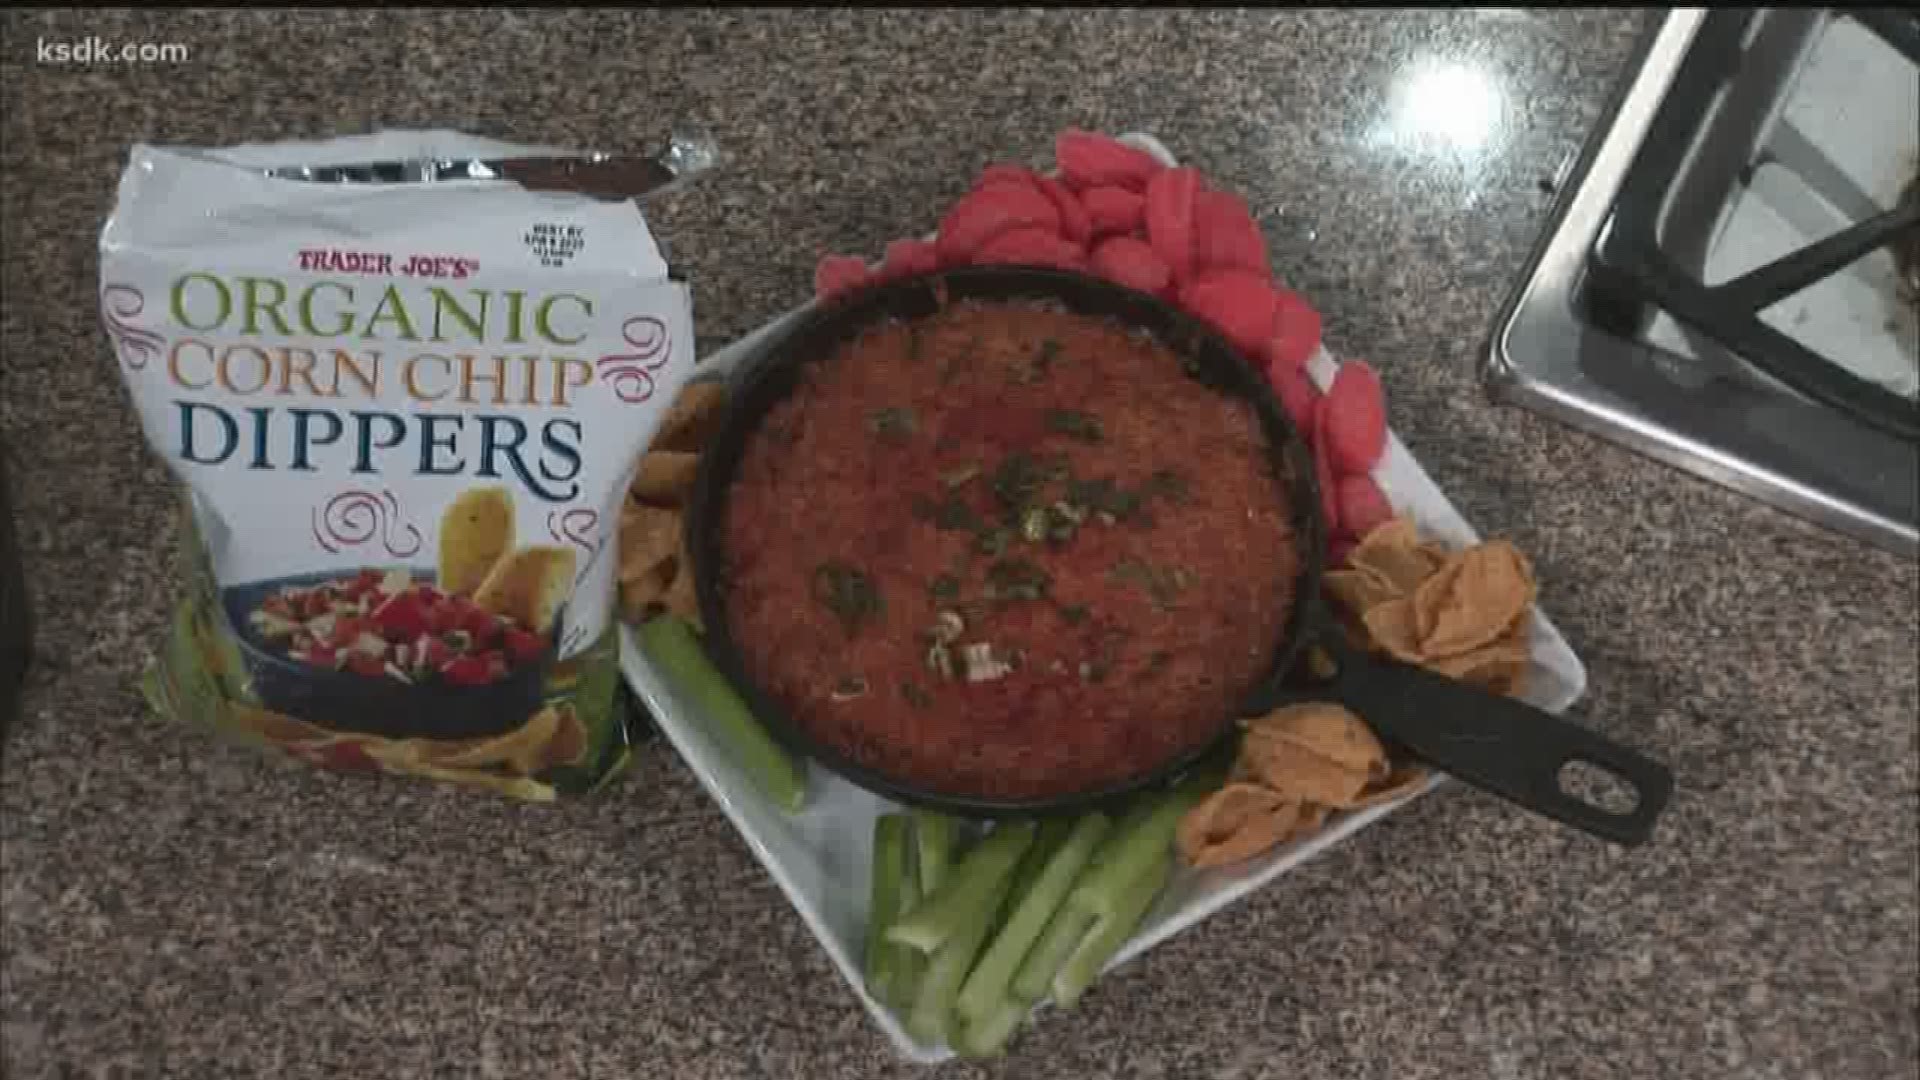 Artinces Smith of Fabulously Vegan blog shared a recipe that would make a great appetizer for the Big Game on Sunday.